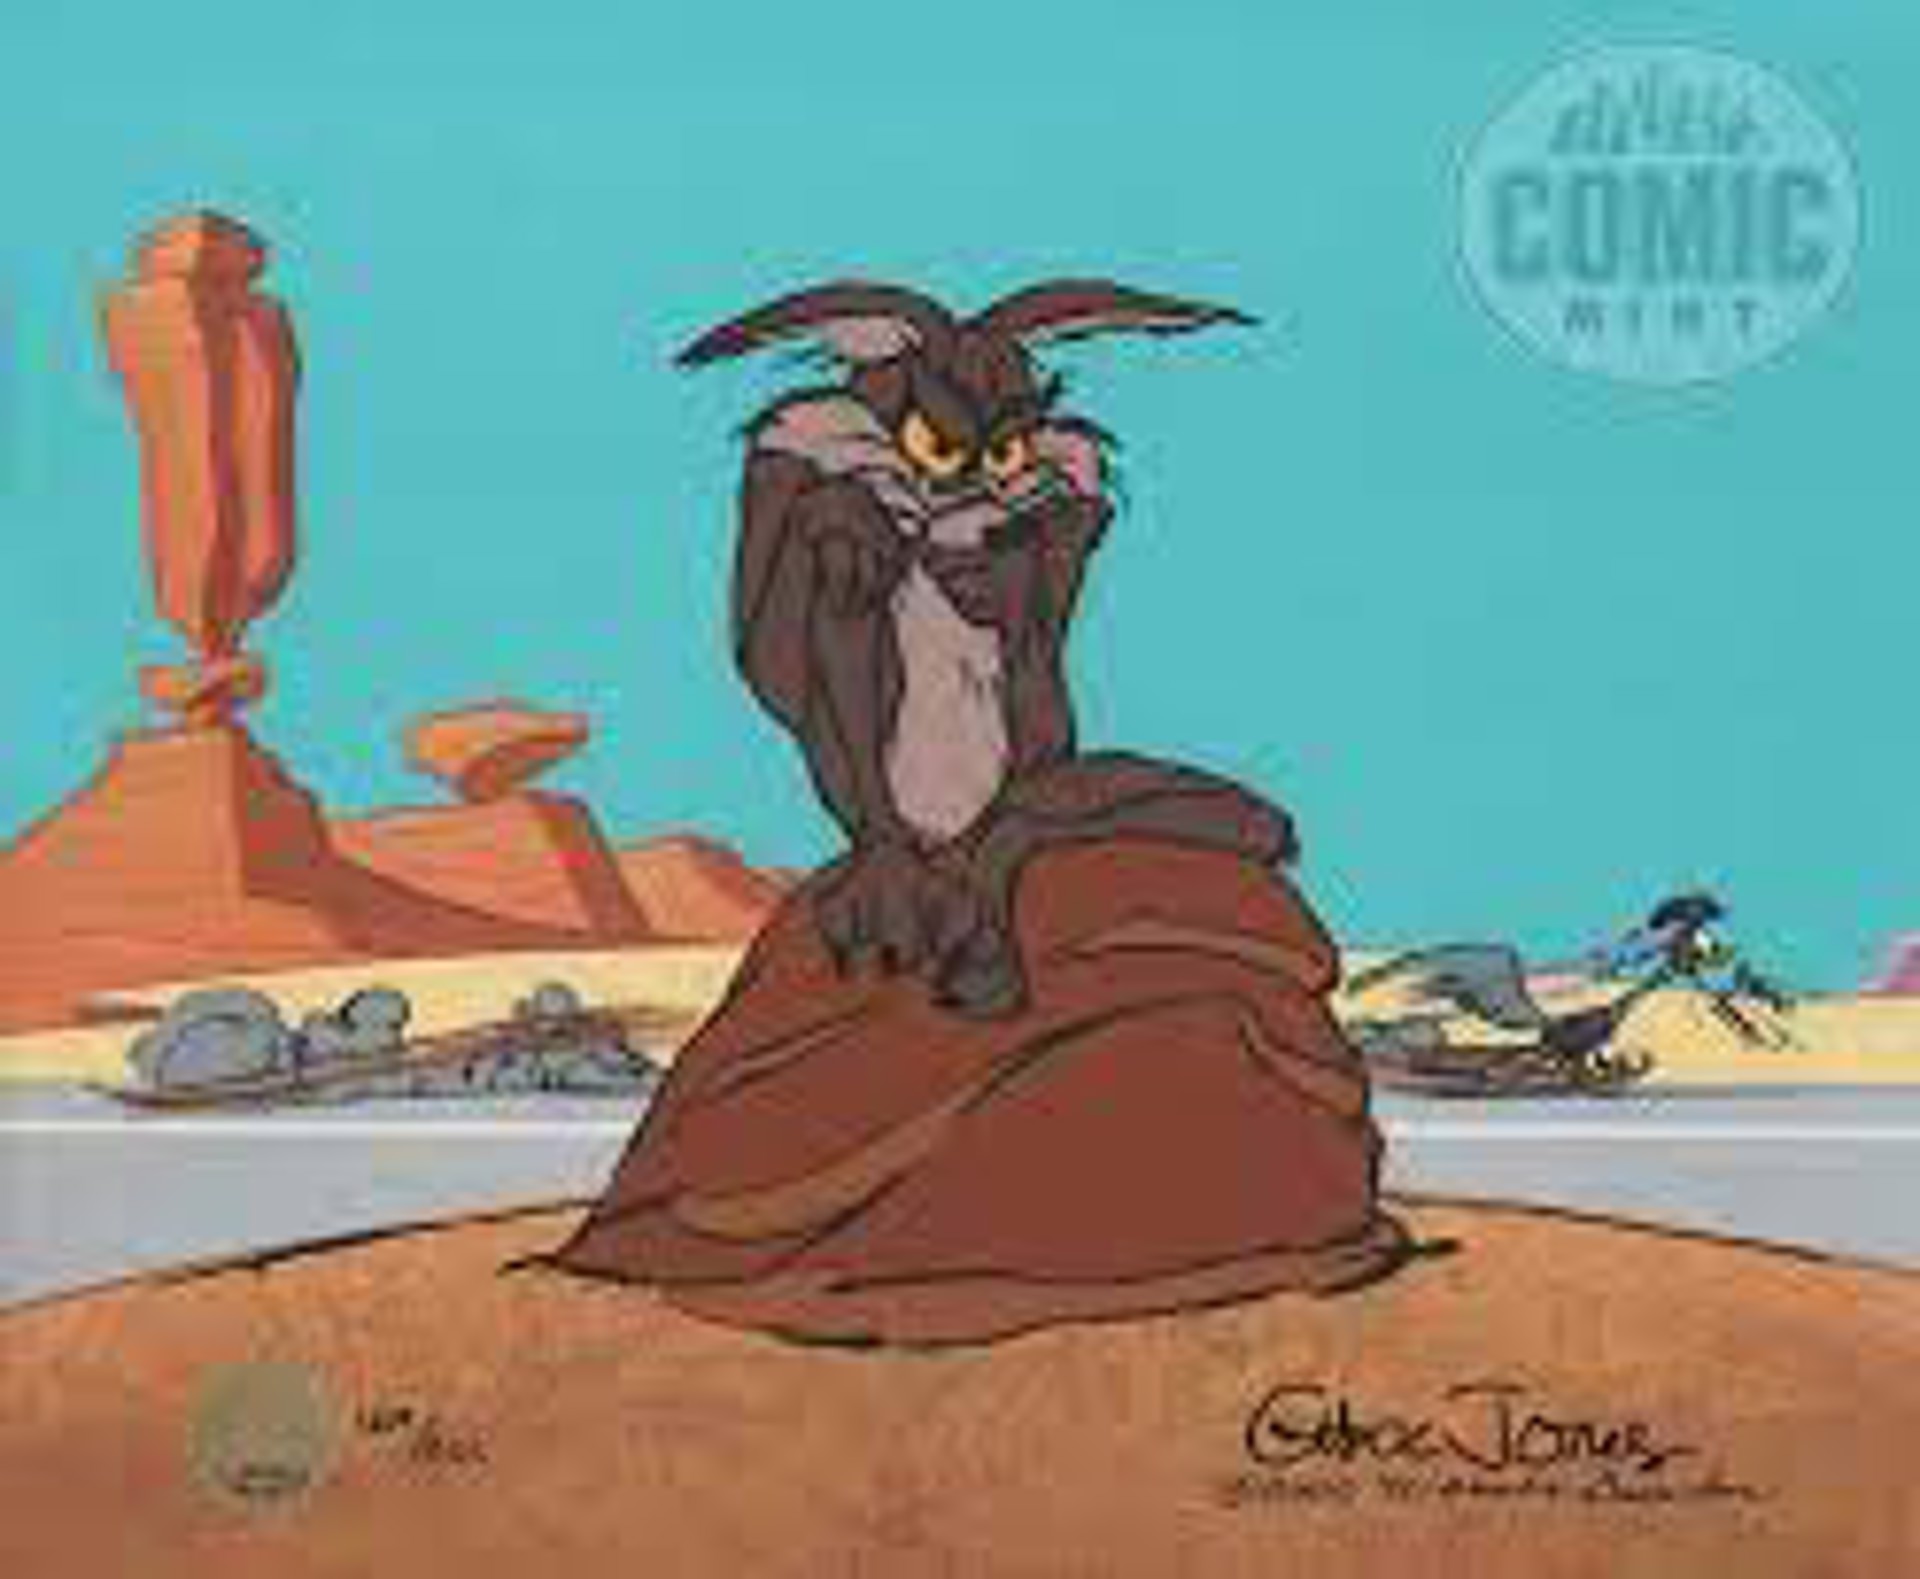 I Think, Therefore I Acme by Chuck Jones